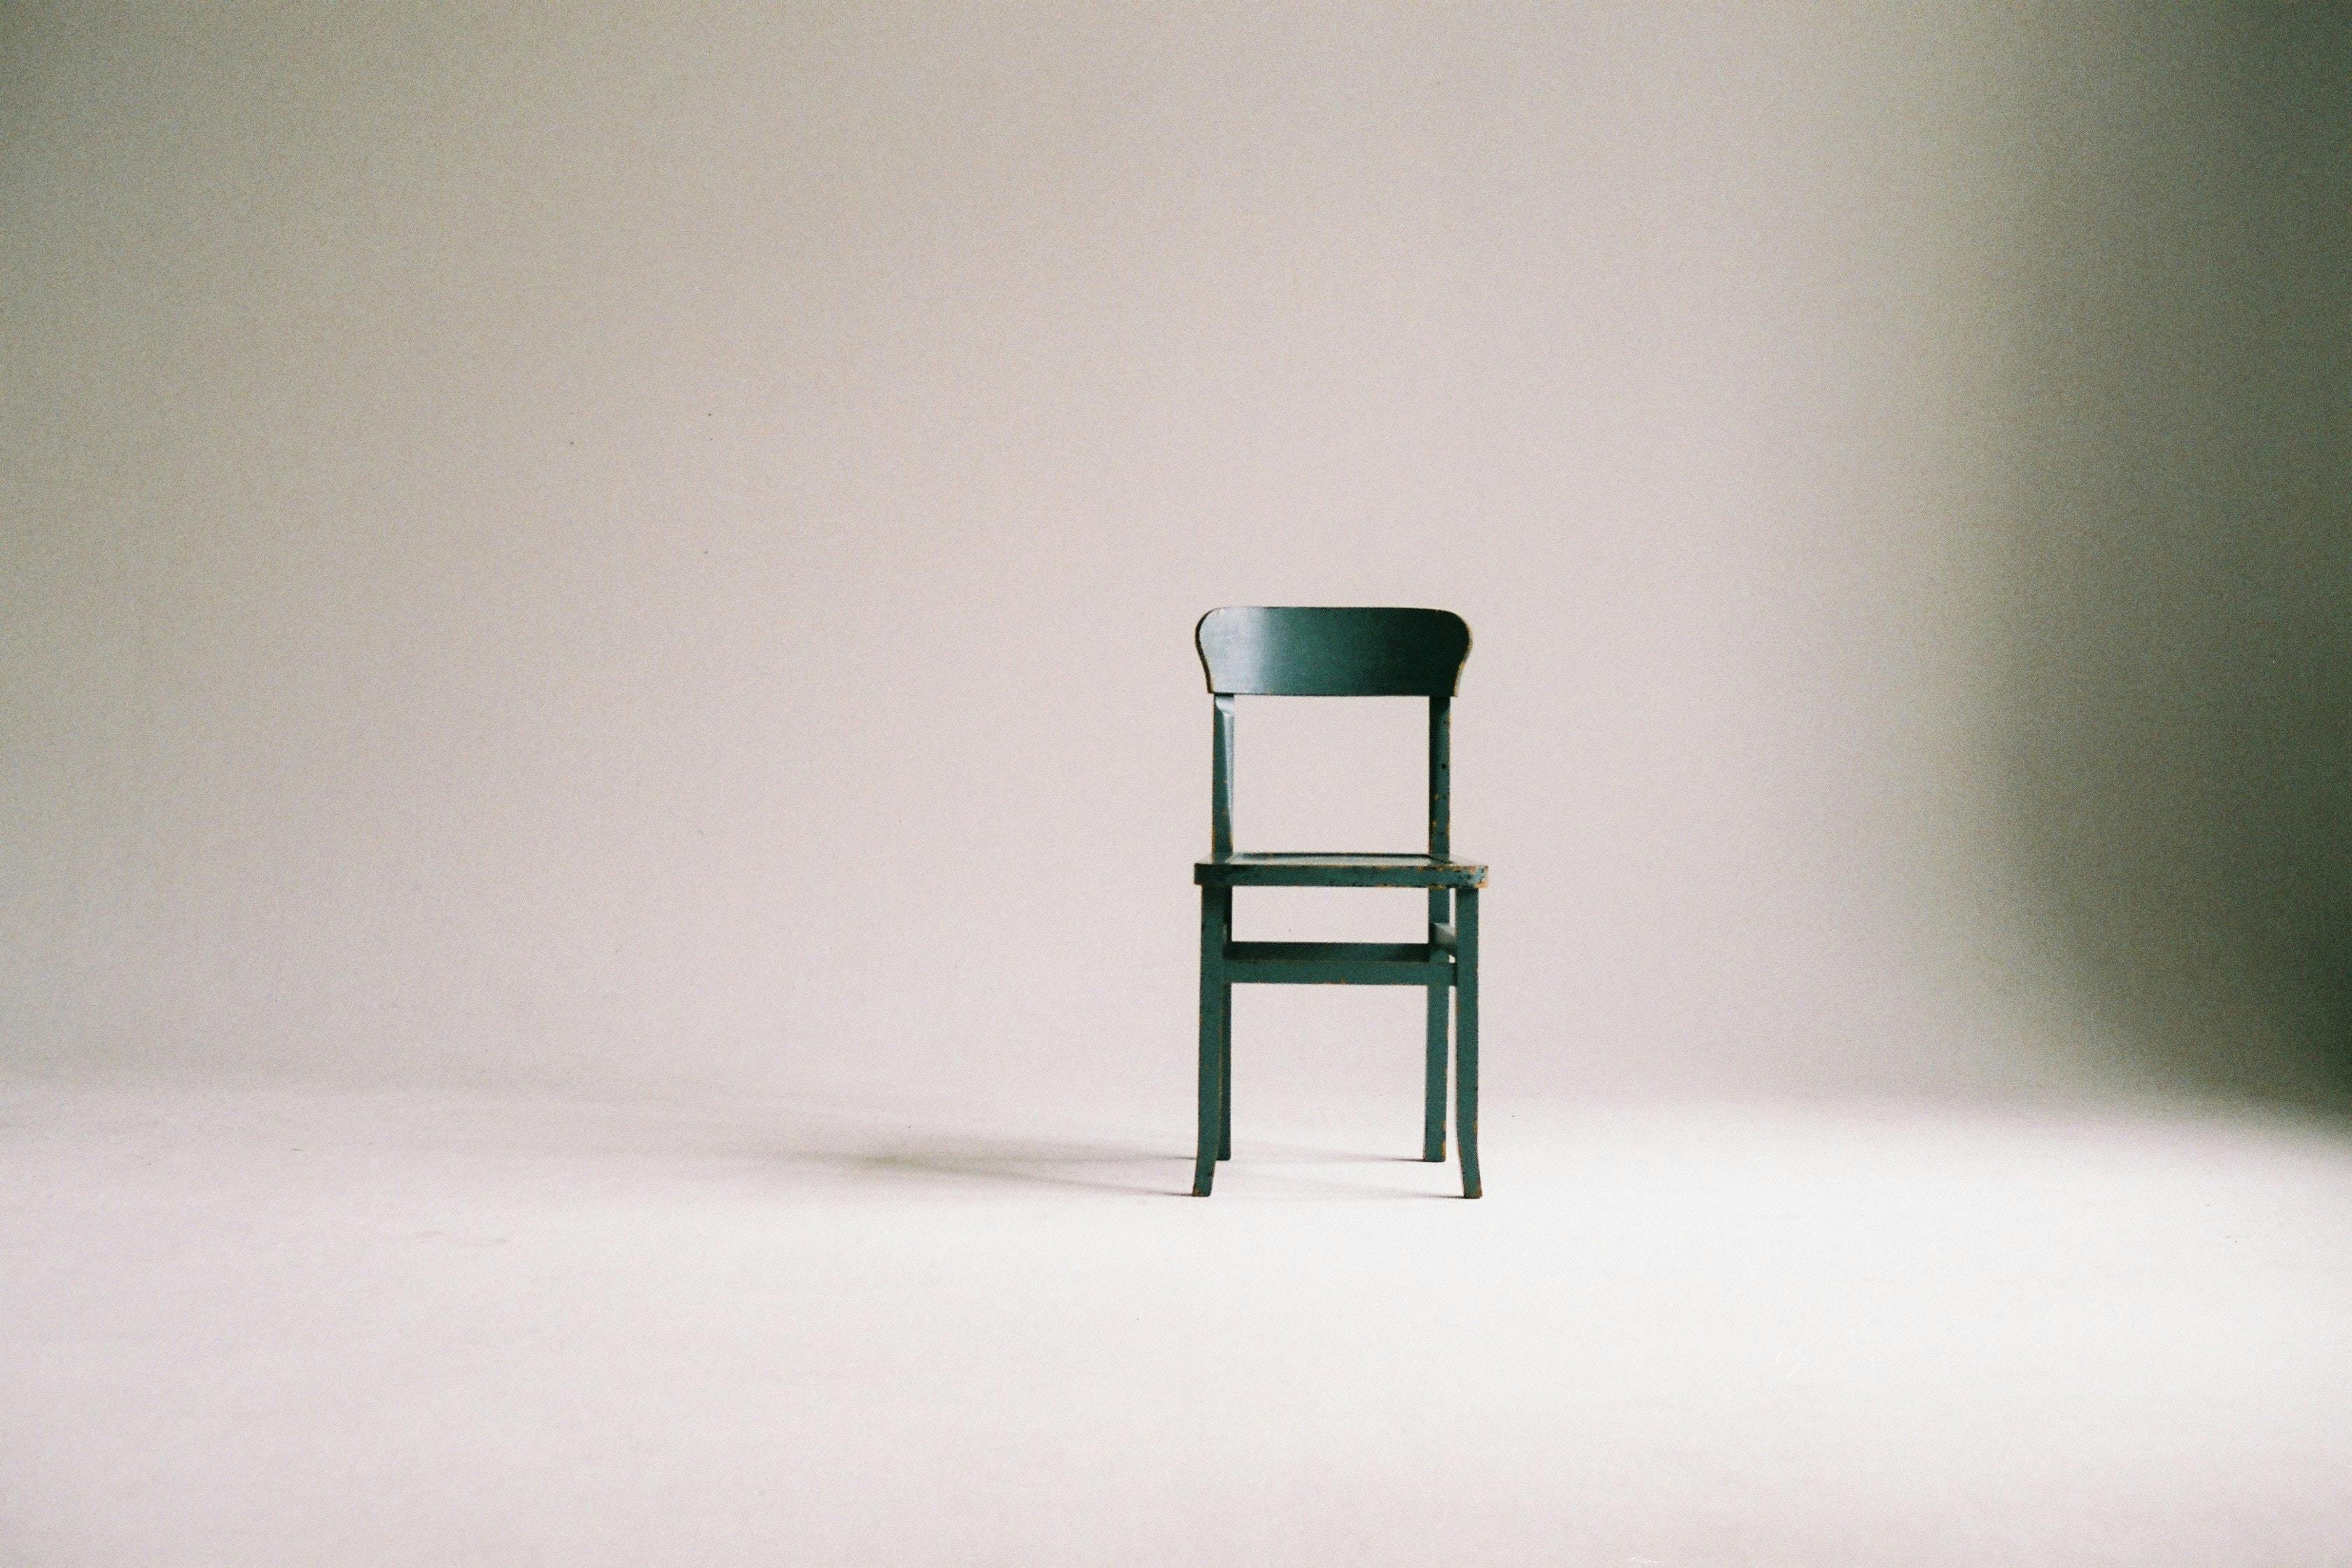 Empty green chair against white background